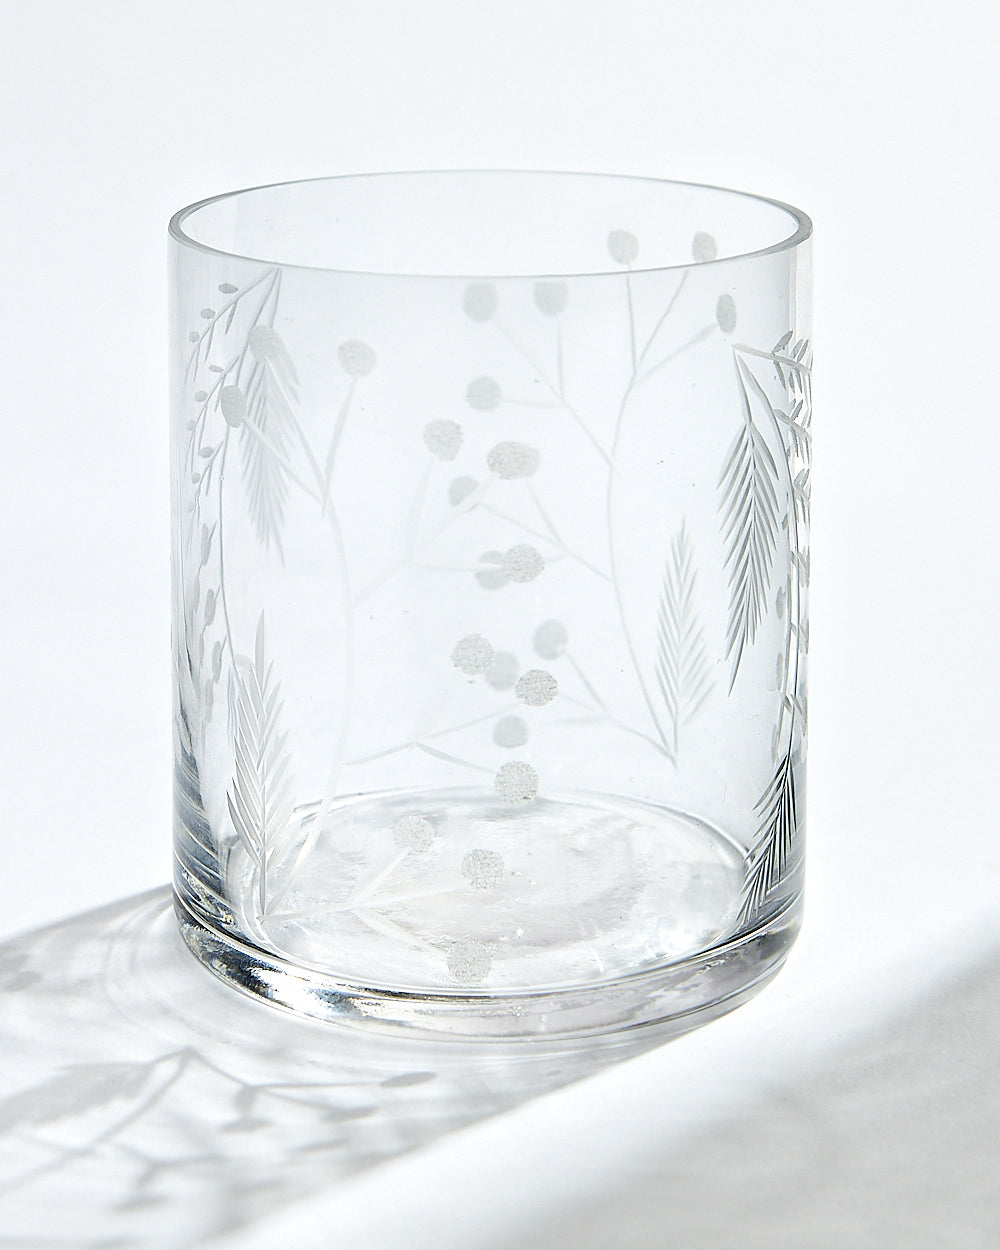 House Party Glass Tumblers - Set of 4